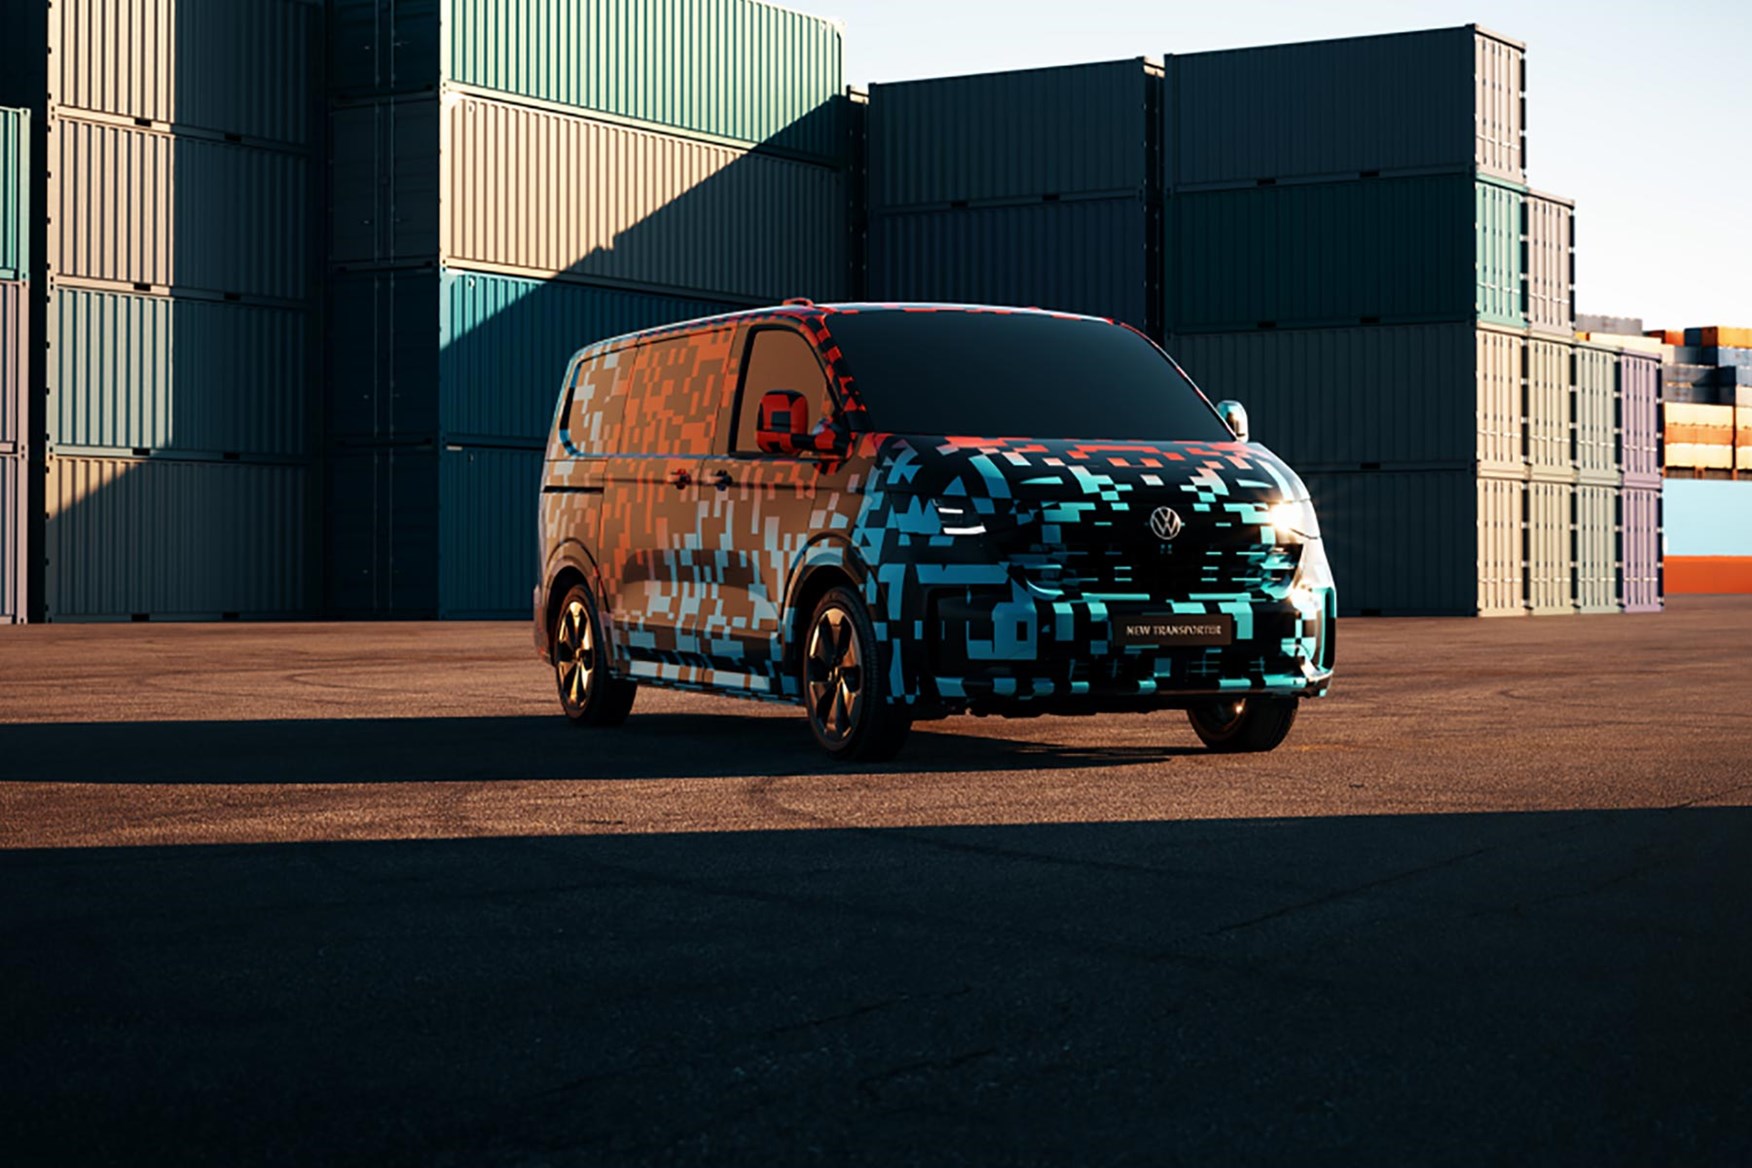 Ford Will Build Volkswagen Transporter Van At Its Otosan Assembly Plant